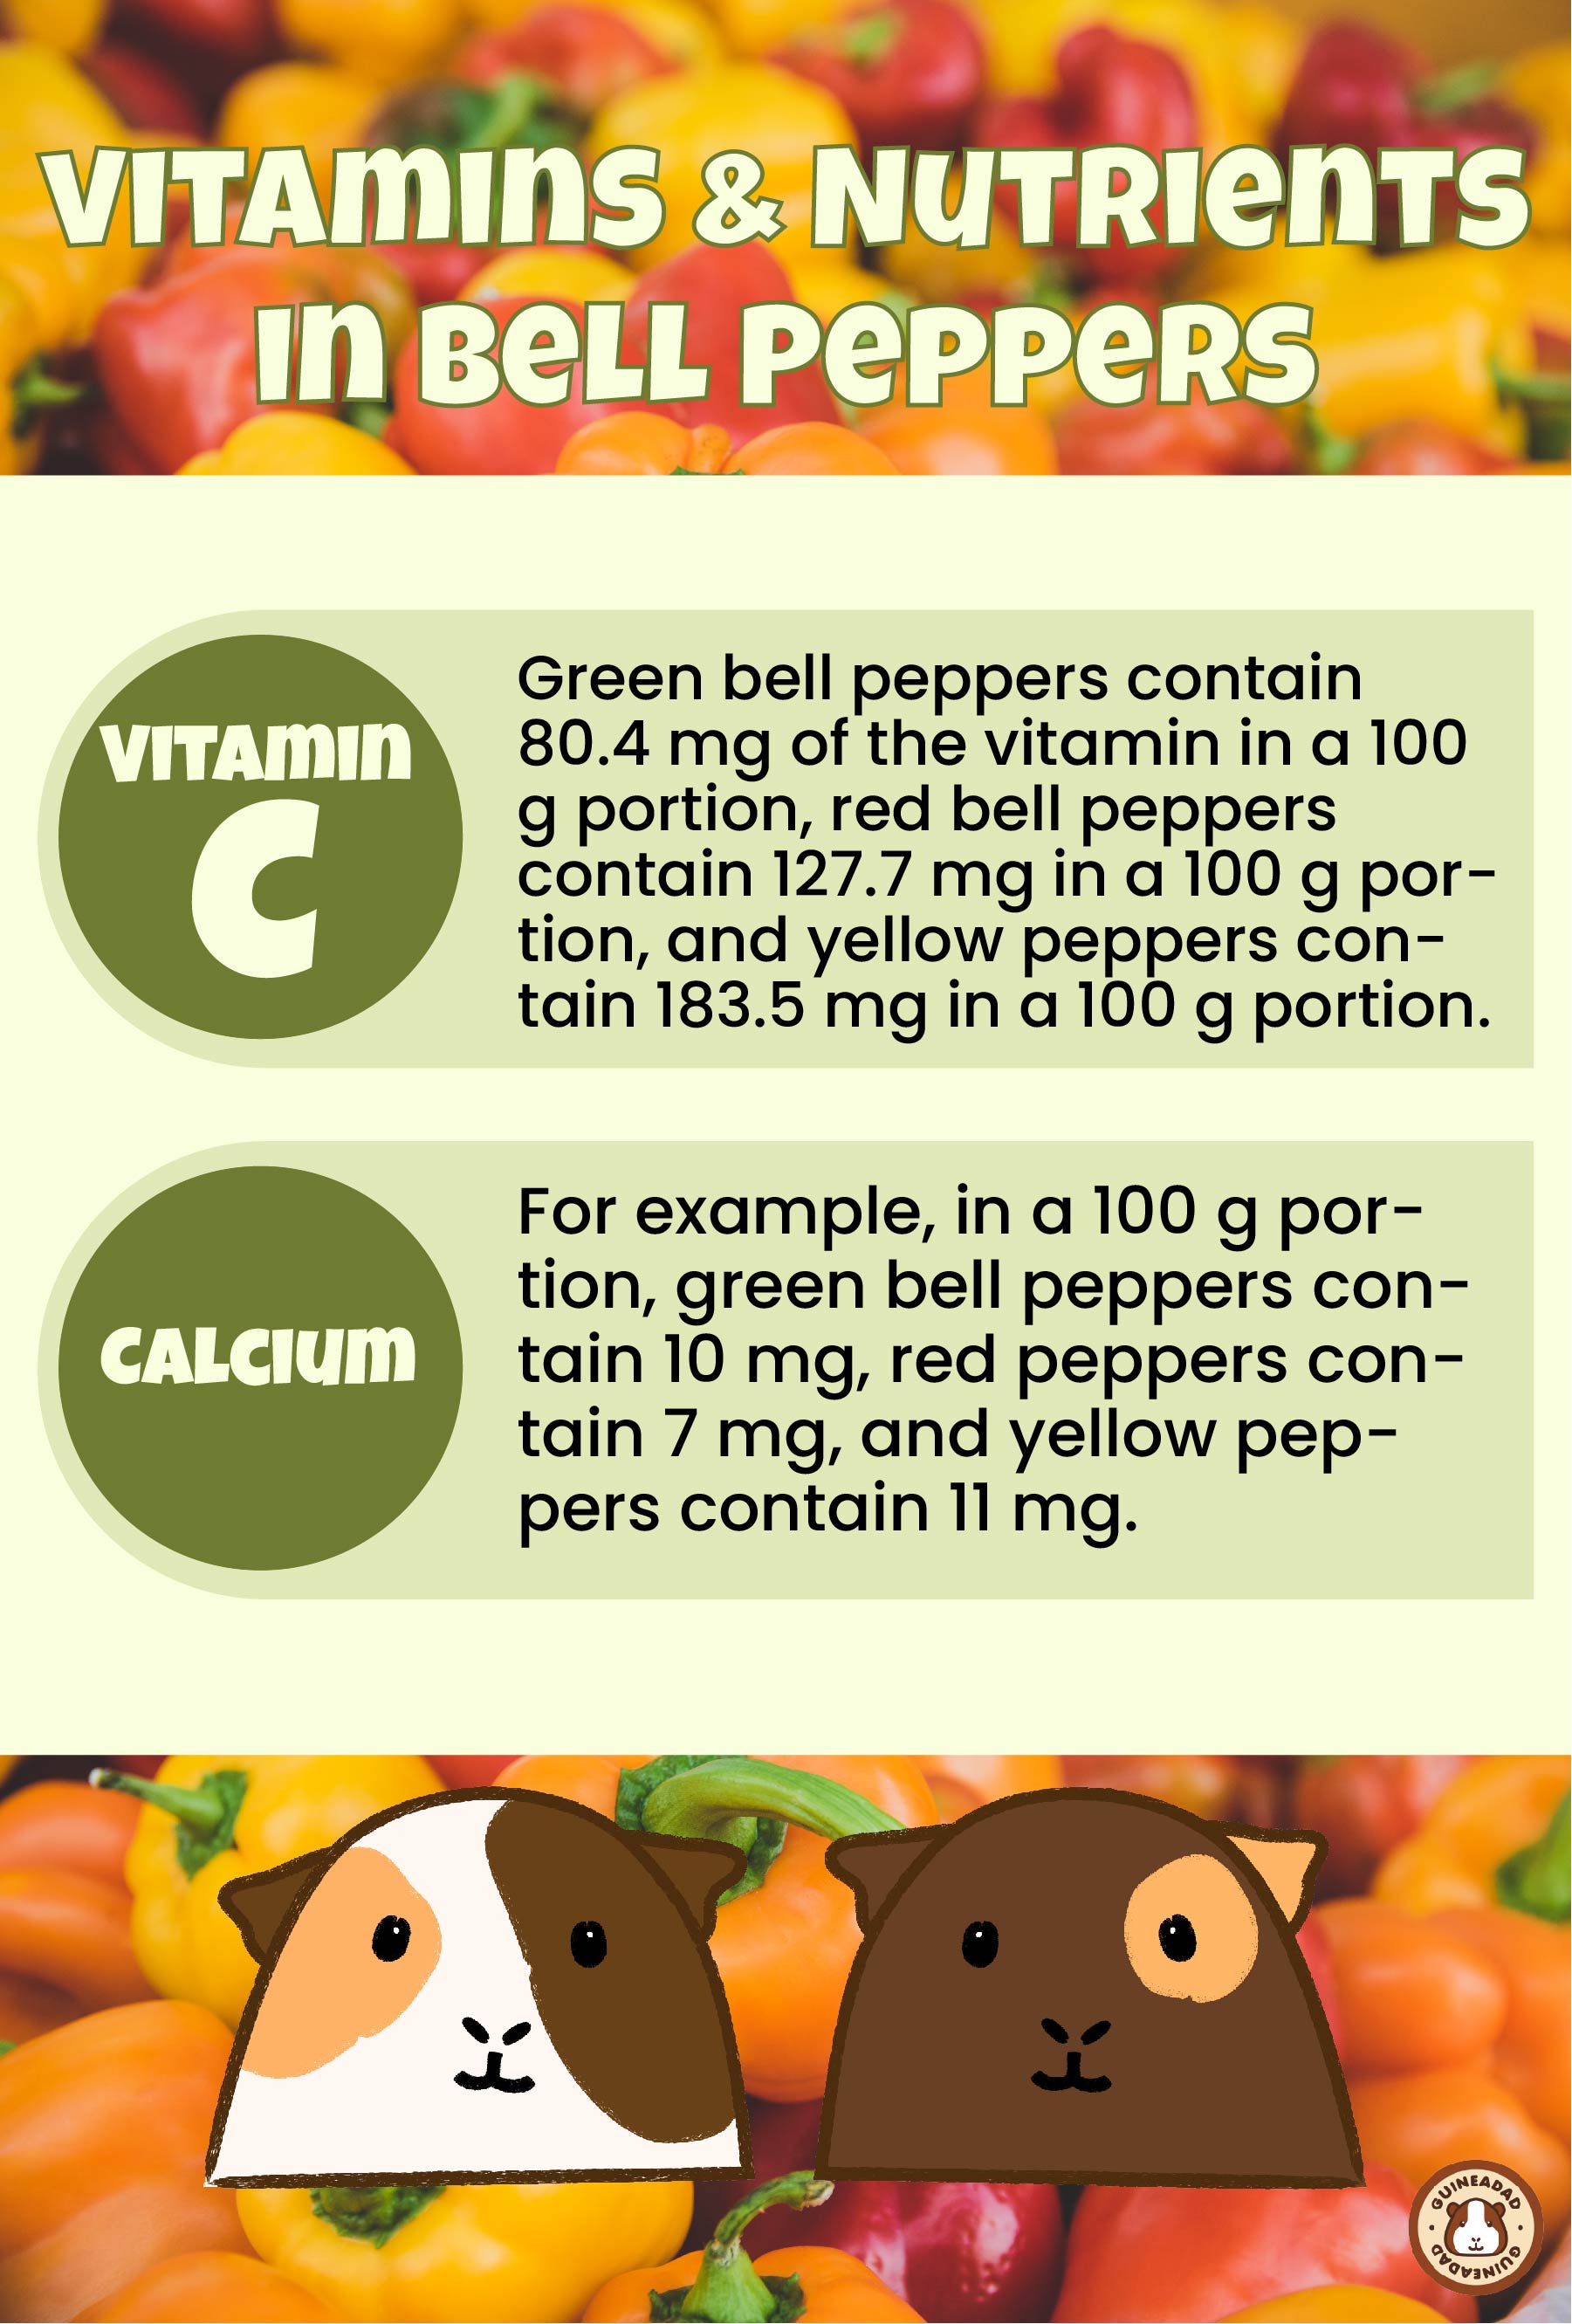 Infographic displaying the vitamins and nutrients in bell peppers